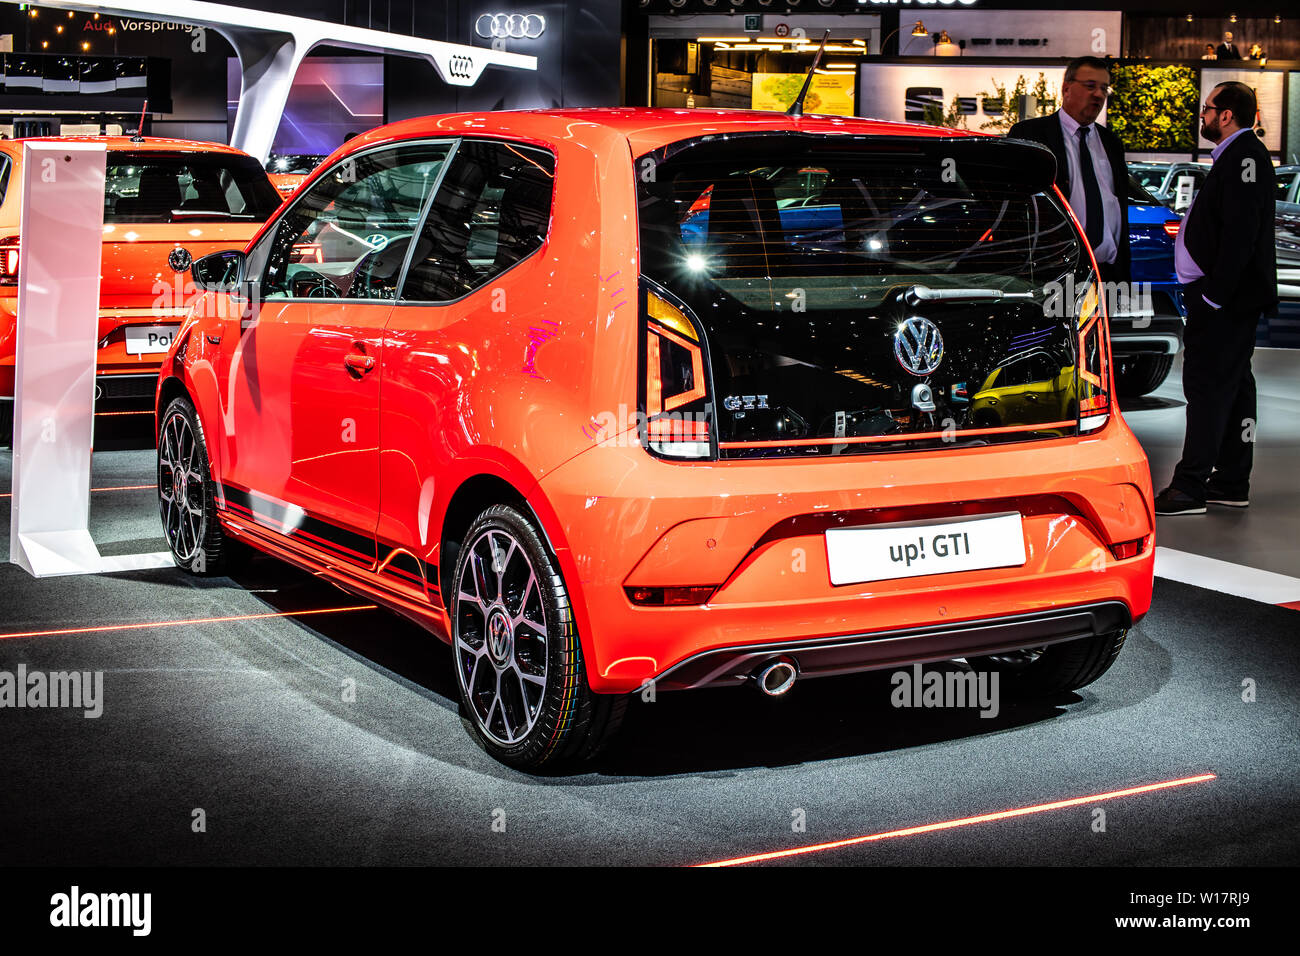 Brussels, Belgium, Jan 18, 2019: metallic red Volkswagen VW up! GTI at Brussels Motor Show,  New Small Family, NSF, city car produced by Volkswagen Stock Photo